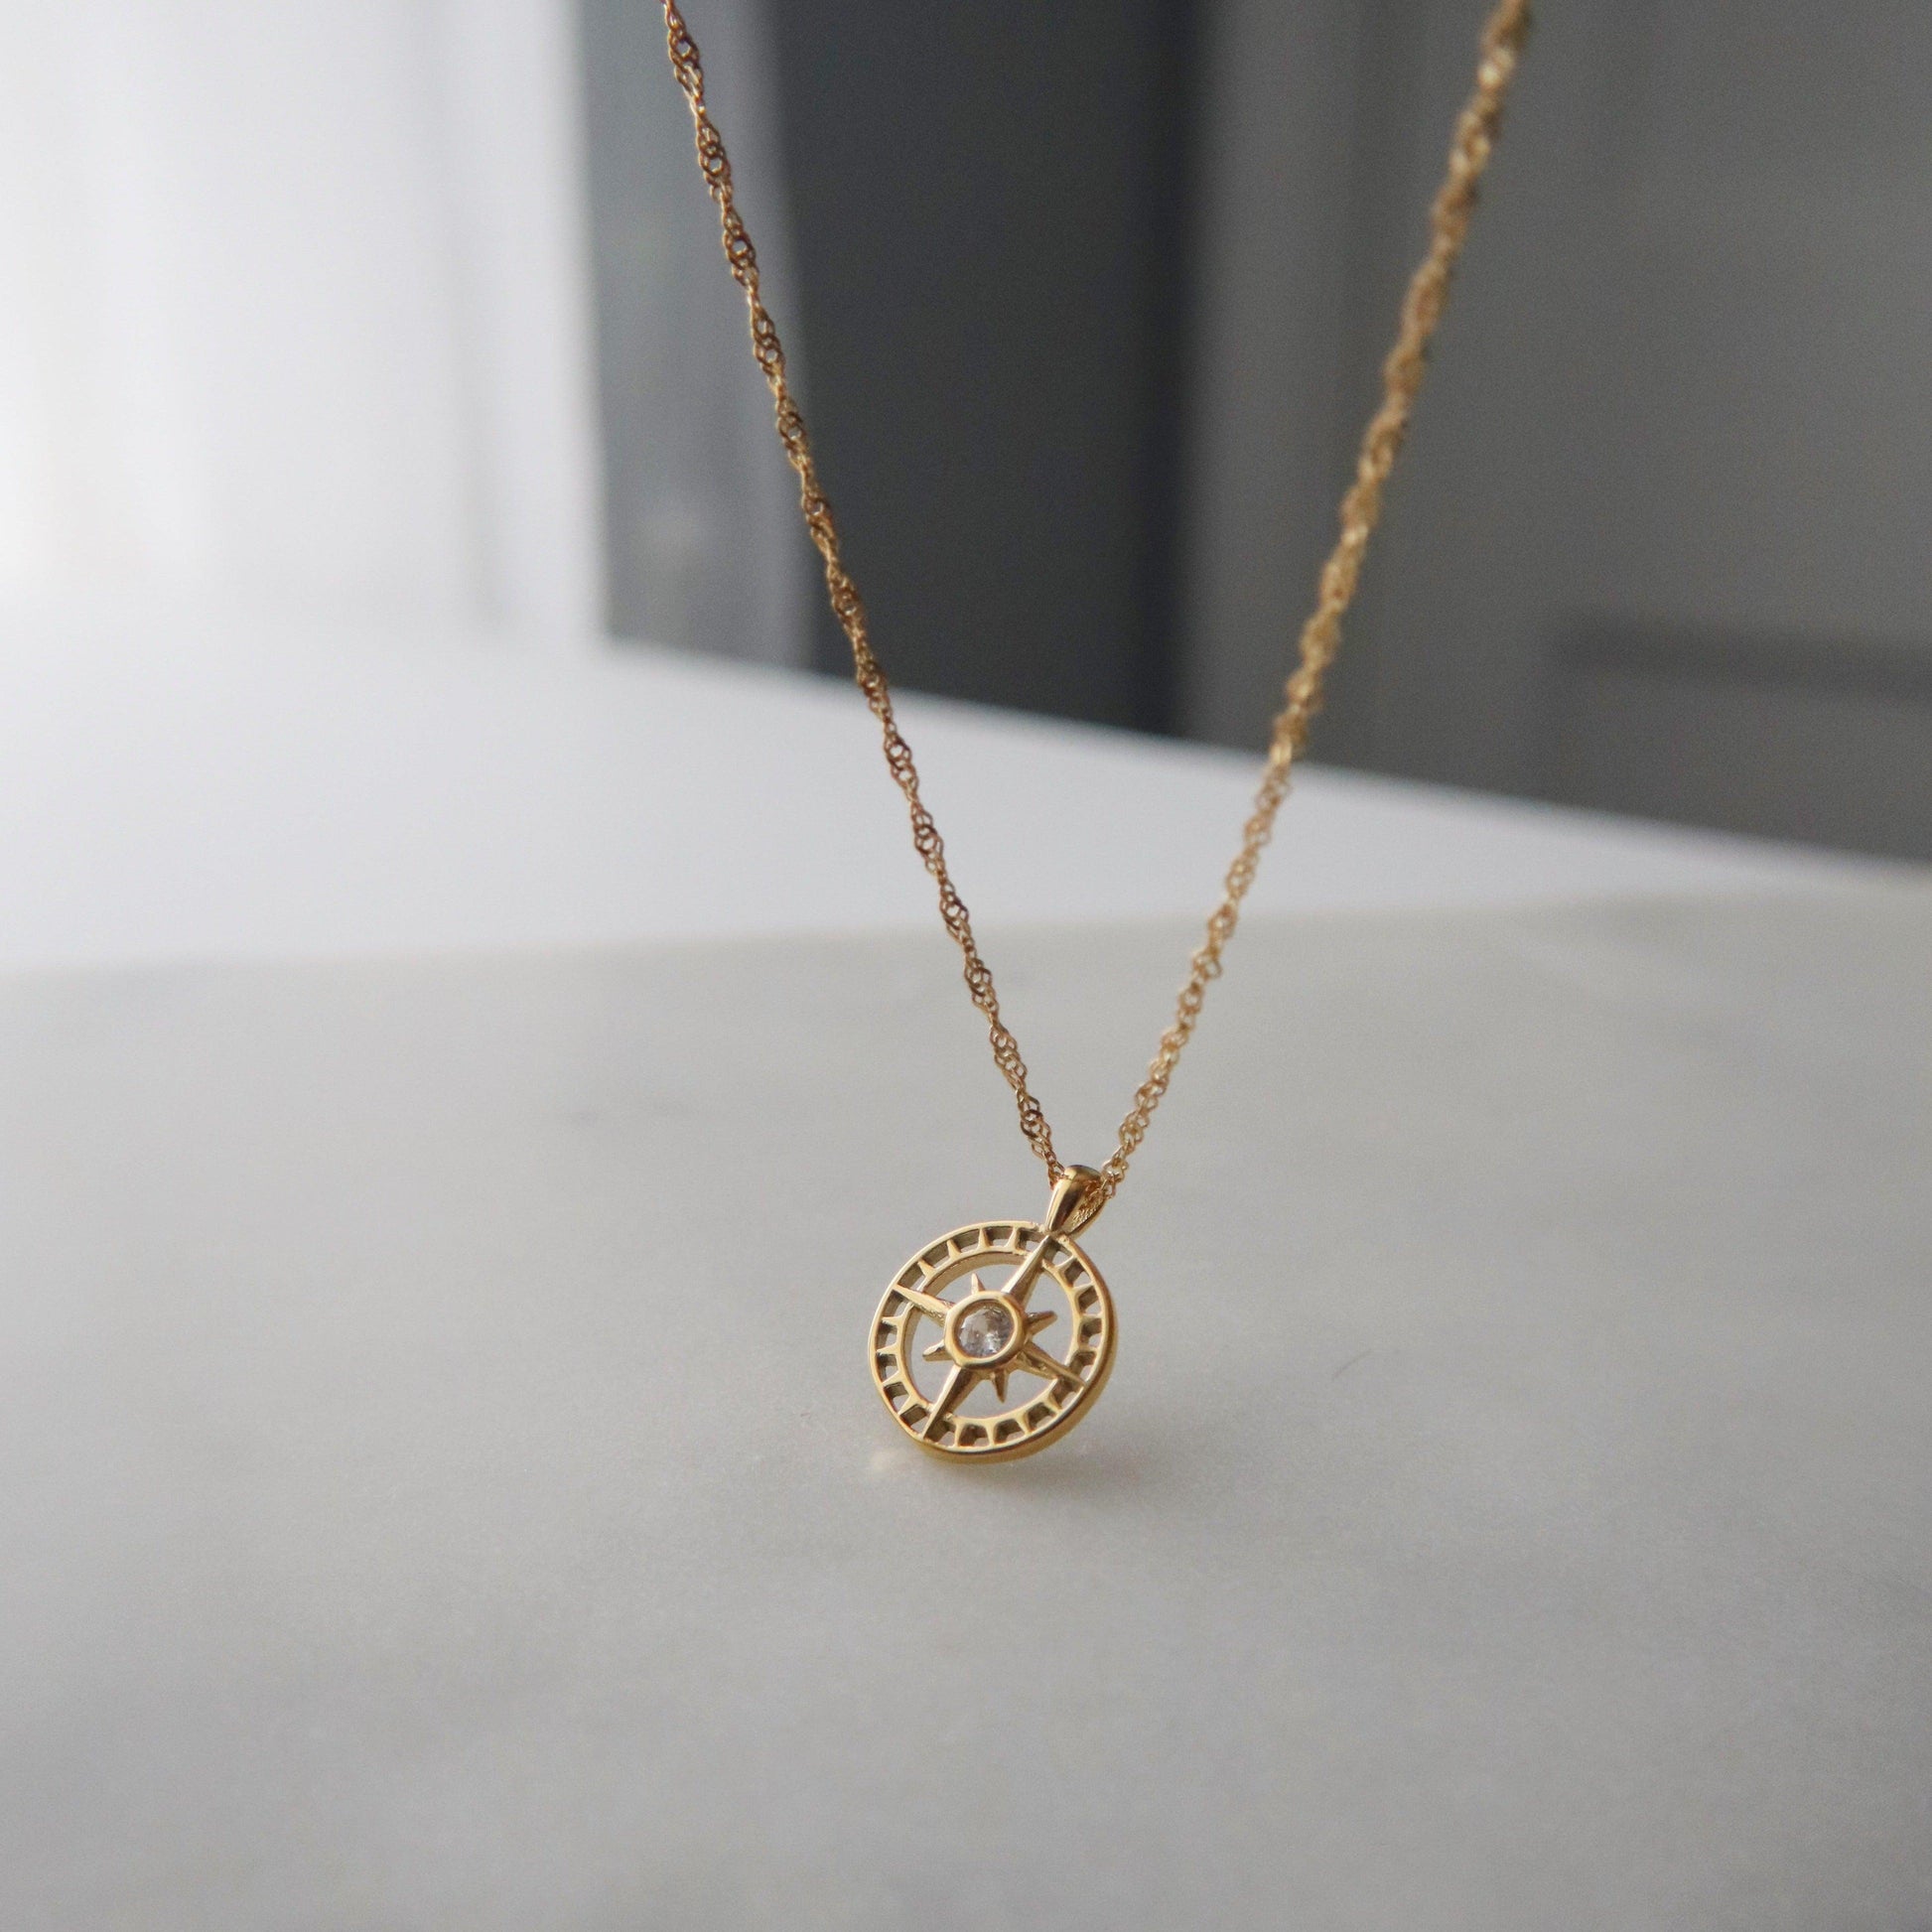 Compass Necklace | Pendant Necklace - JESSA JEWELRY | GOLD JEWELRY; dainty, affordable gold everyday jewelry. Tarnish free, water-resistant, hypoallergenic. Jewelry for everyday wear